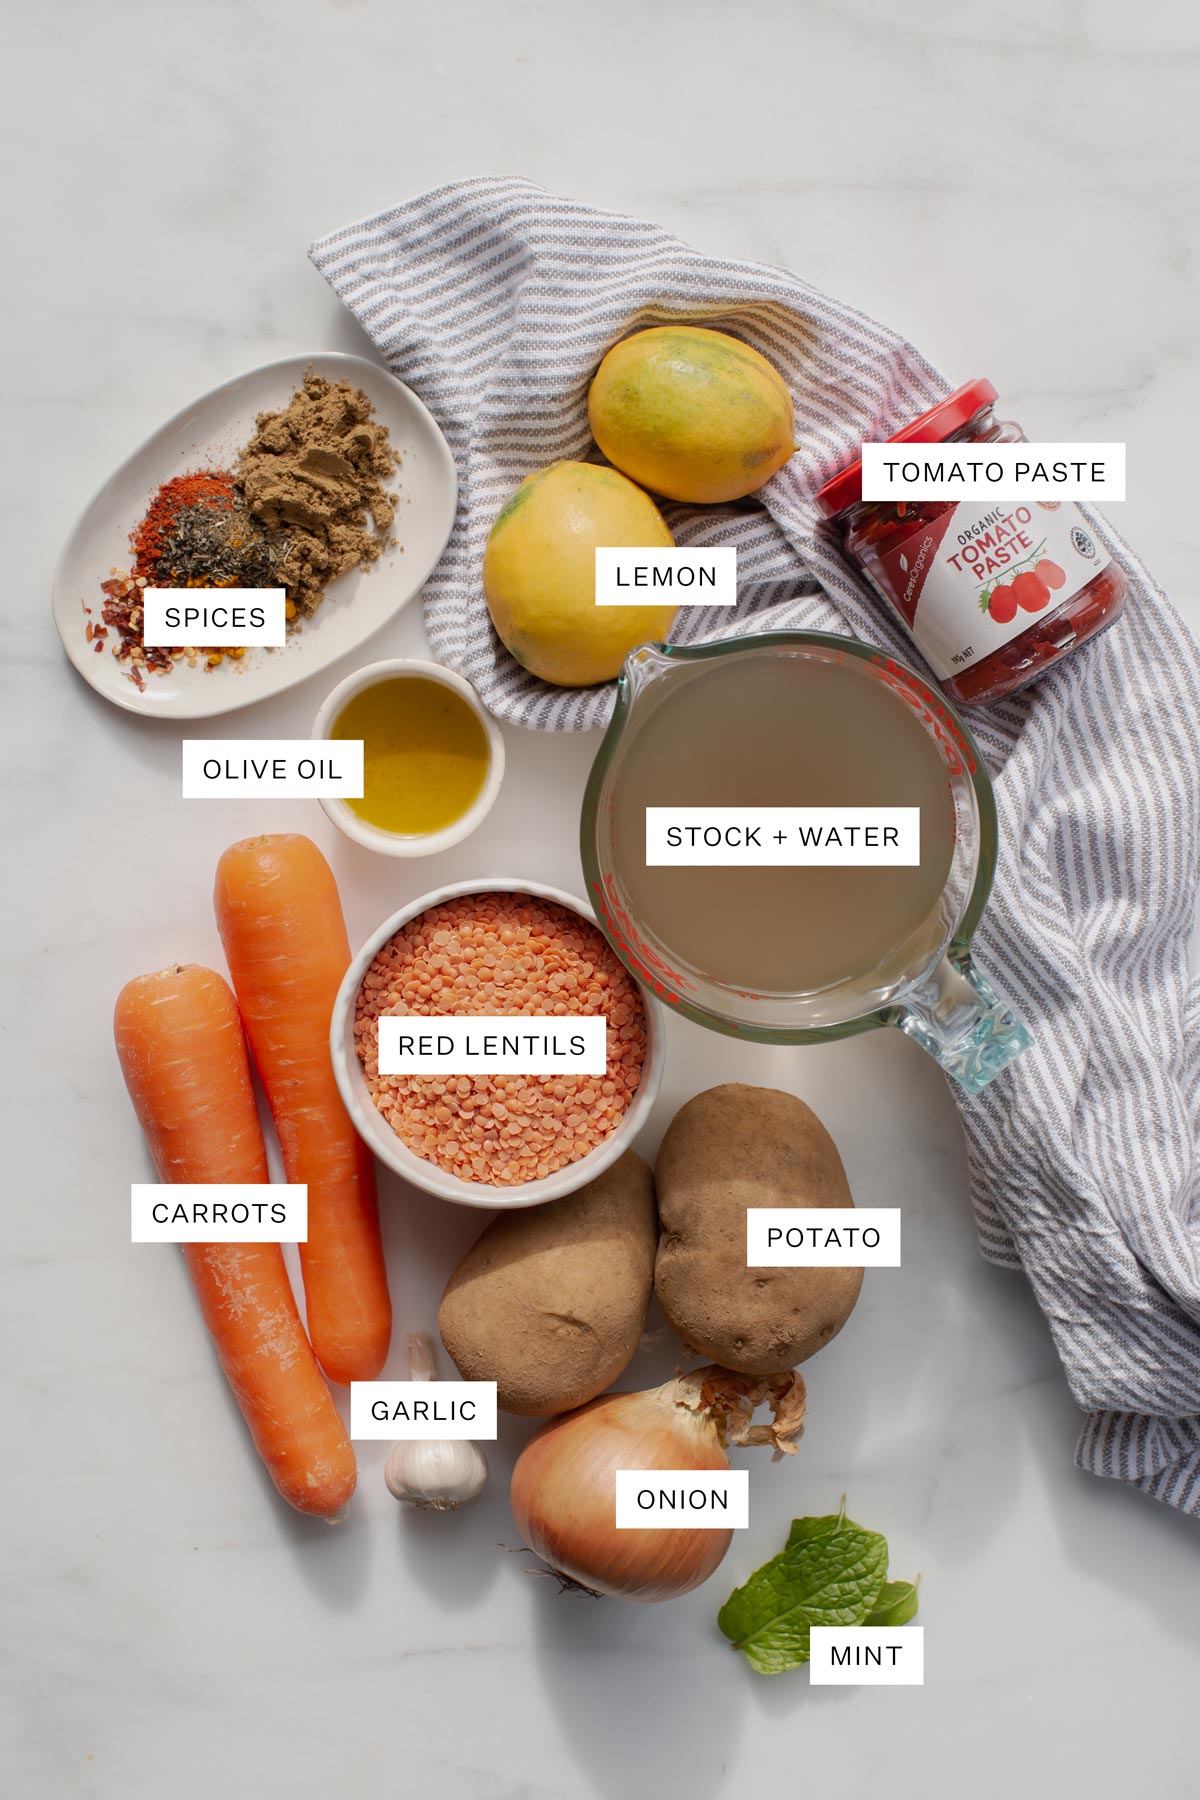 Flat lay of all the ingredients needed to make this recipe.